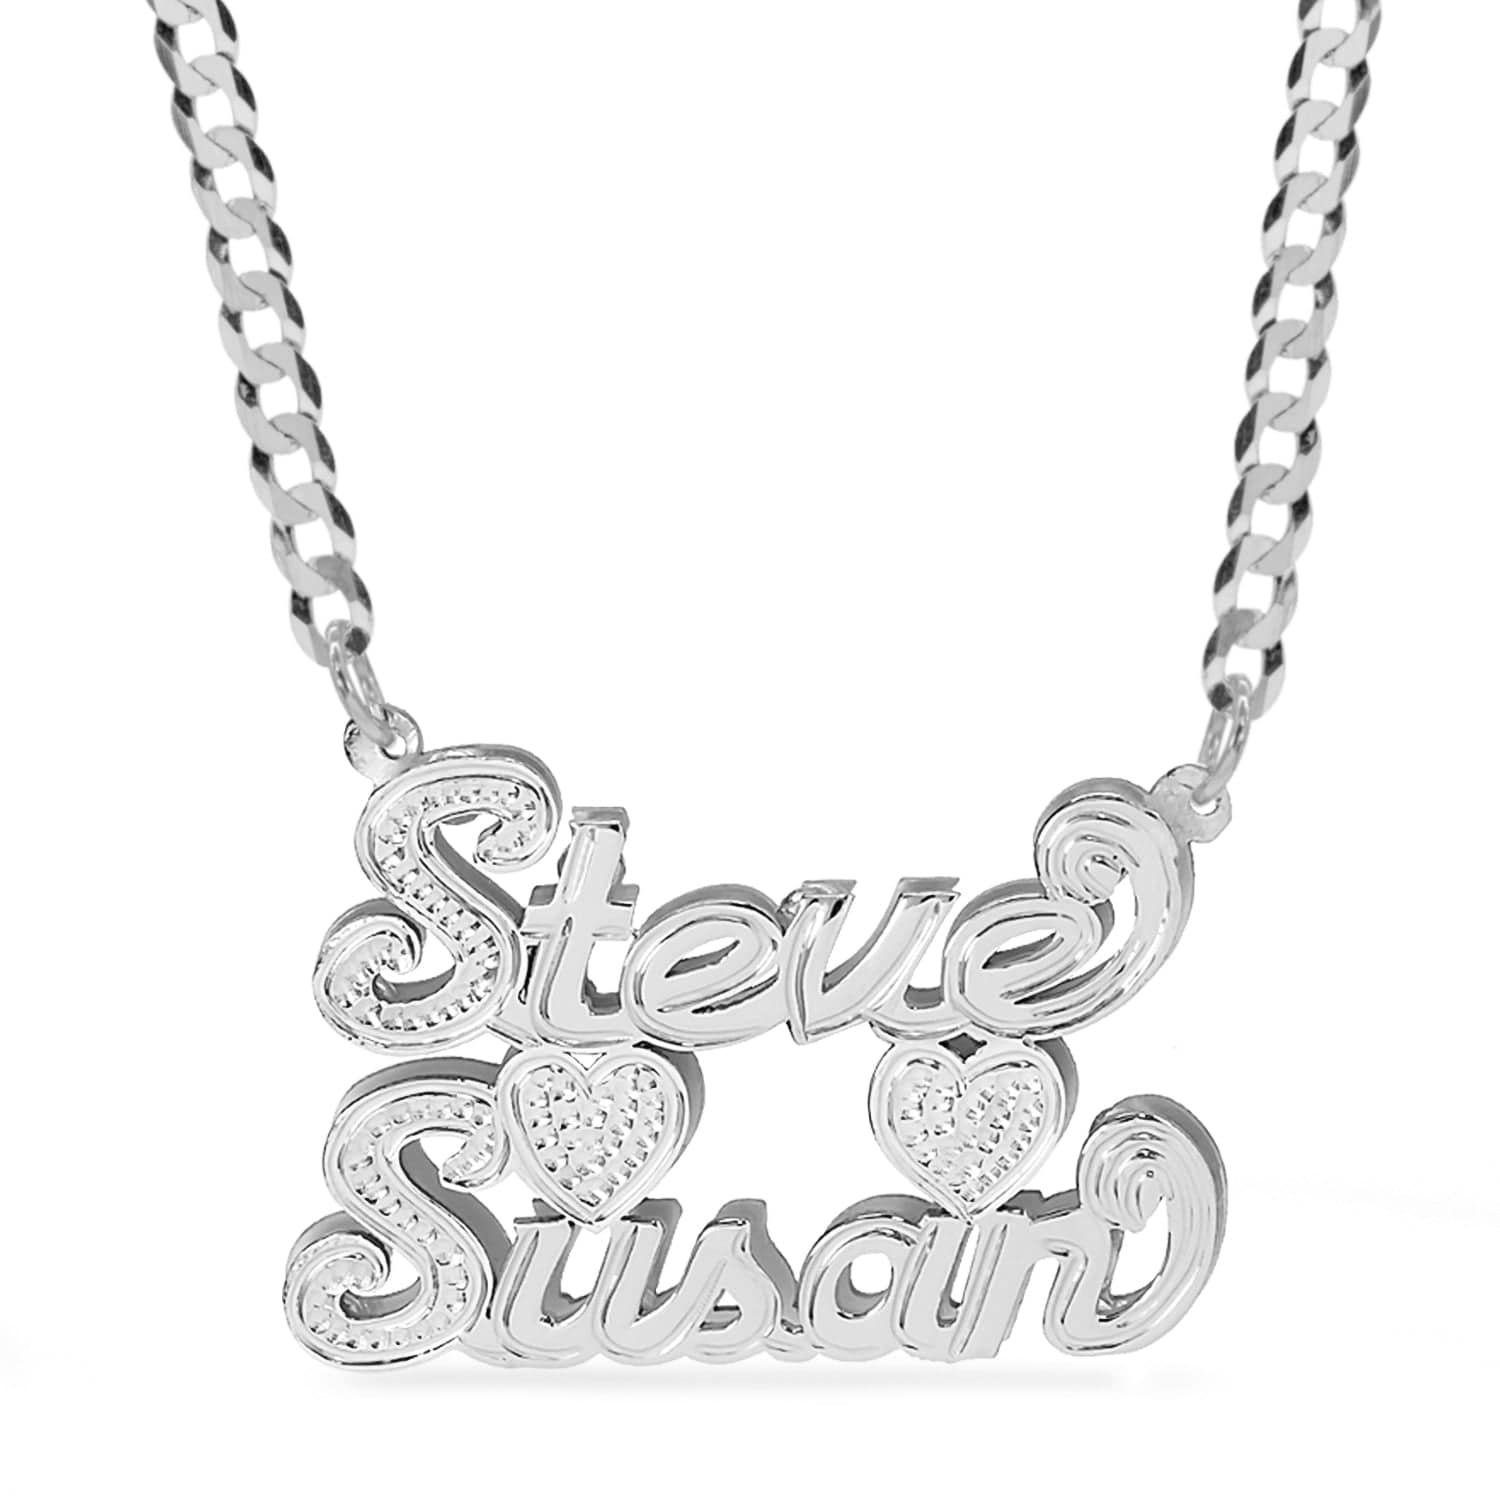 Two-Tone Sterling Silver / Cuban Chain Double Plated Name Necklace - Couples - Best Friends